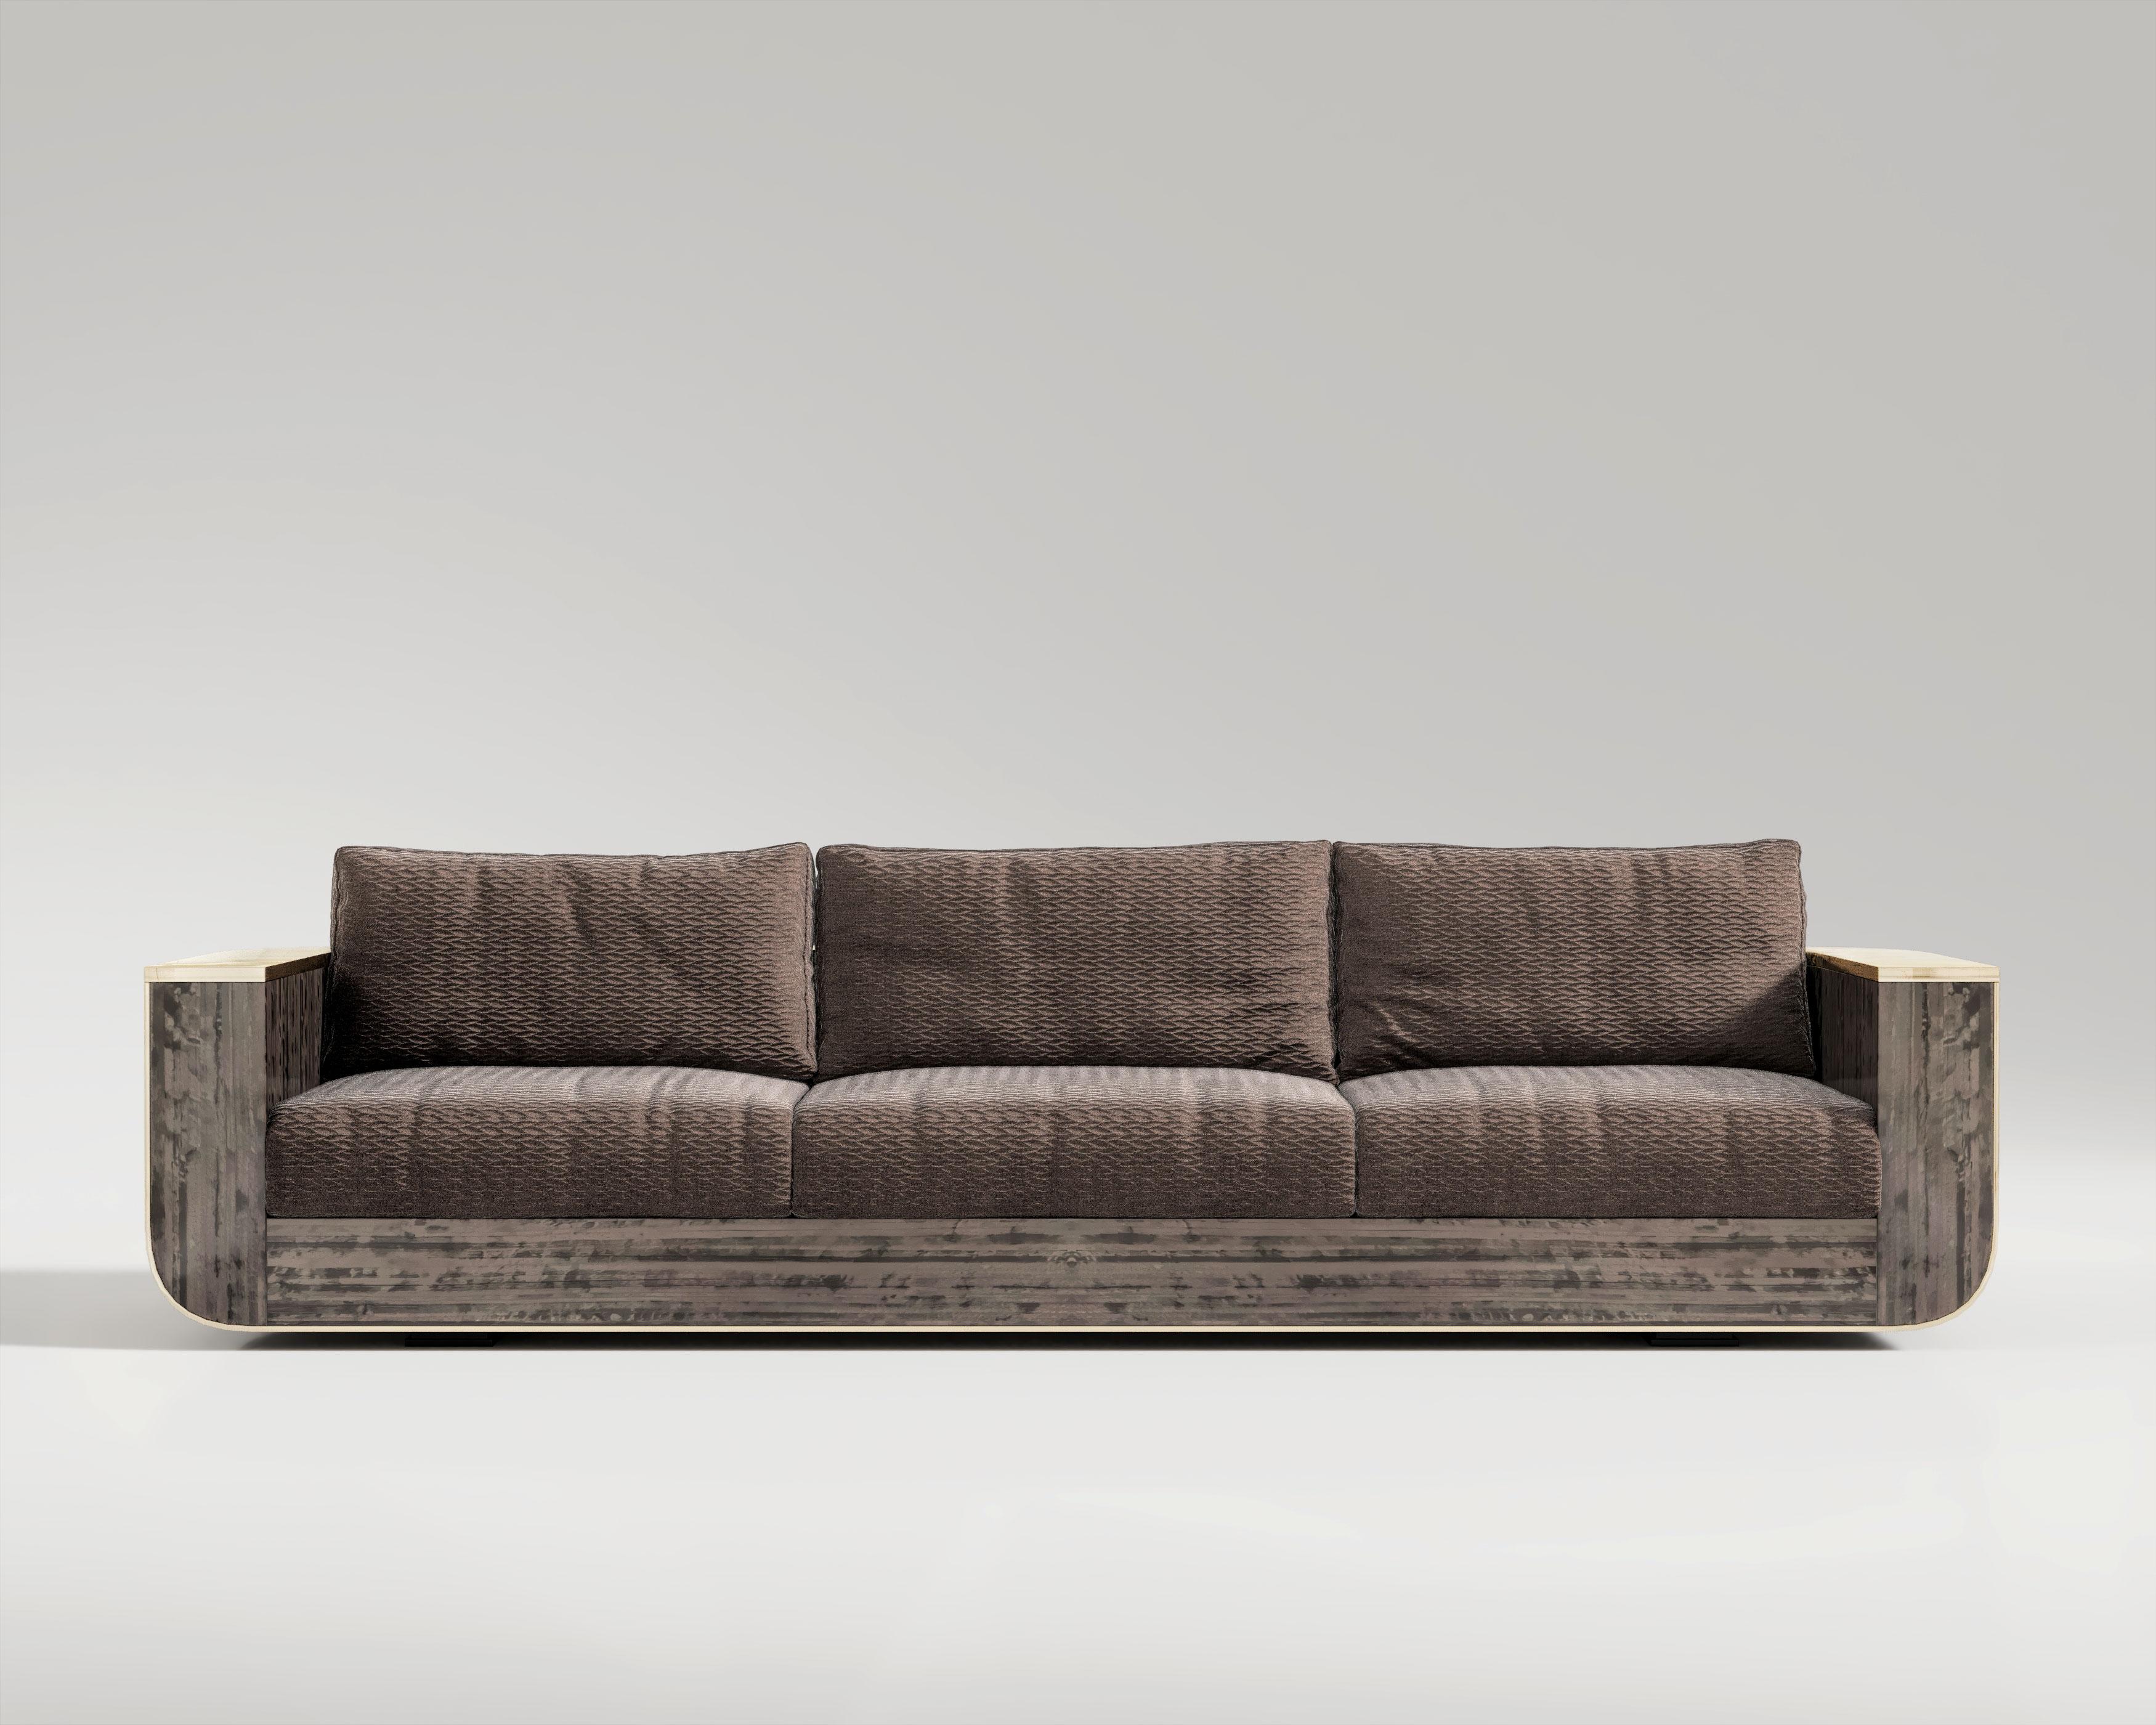 Forte Sofa Eucalyptus

The Forte Sofa is an artisanal piece of contemporary design, with a ziricote frame beautifully highlighted with polished bronze accents. Luxury is added to the opulence. Its smooth edges and cozy materials distribute